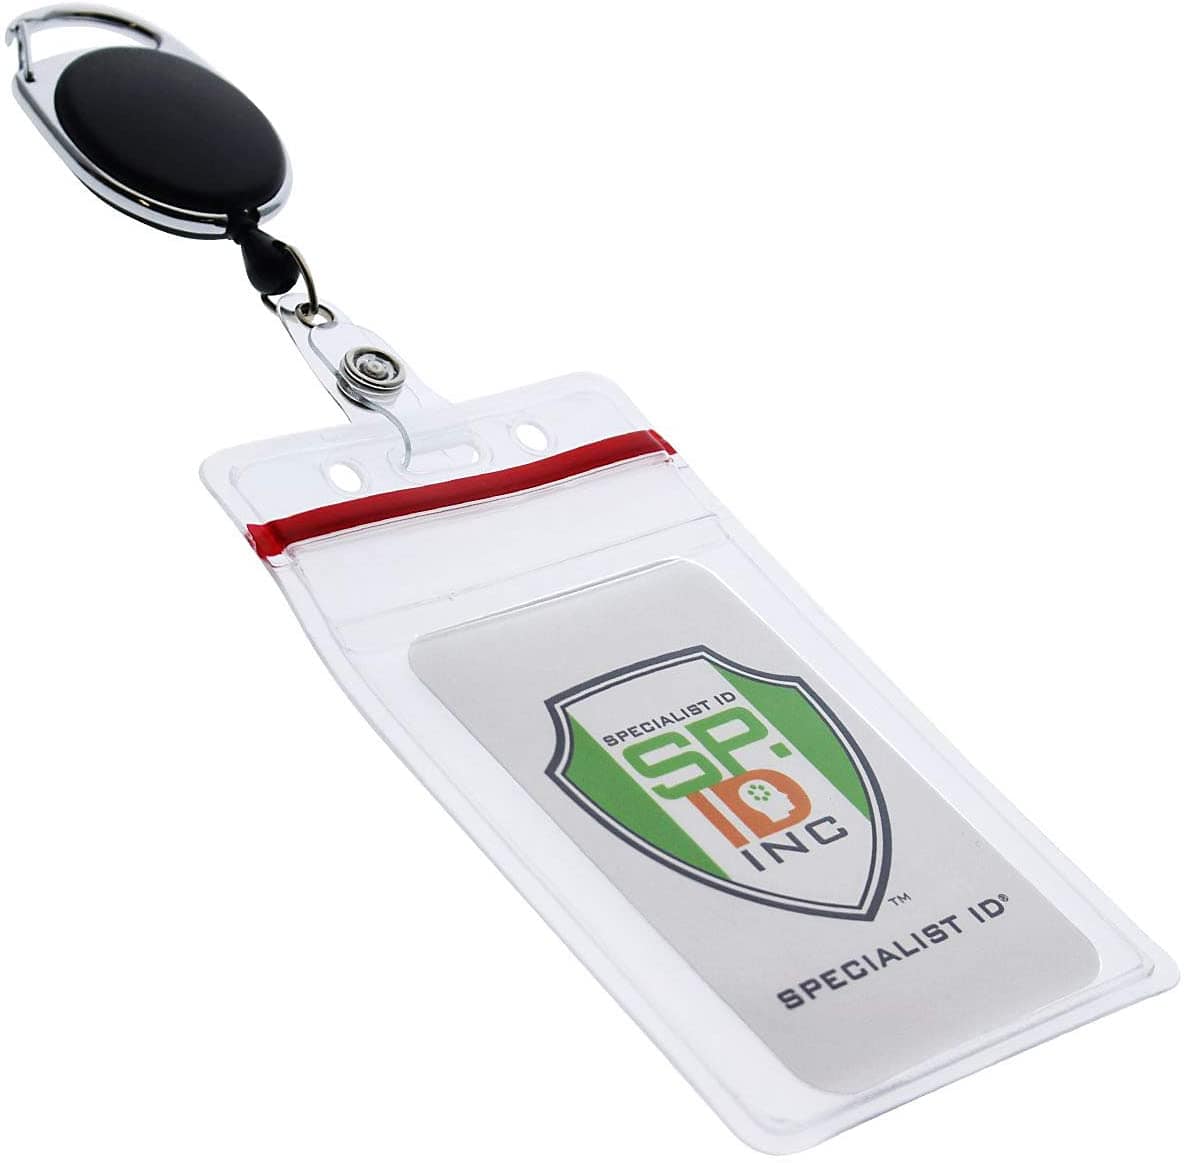 Heavy Duty Vertical Multi-card Badge Holder with Resealable Zip Top (1815-1110)